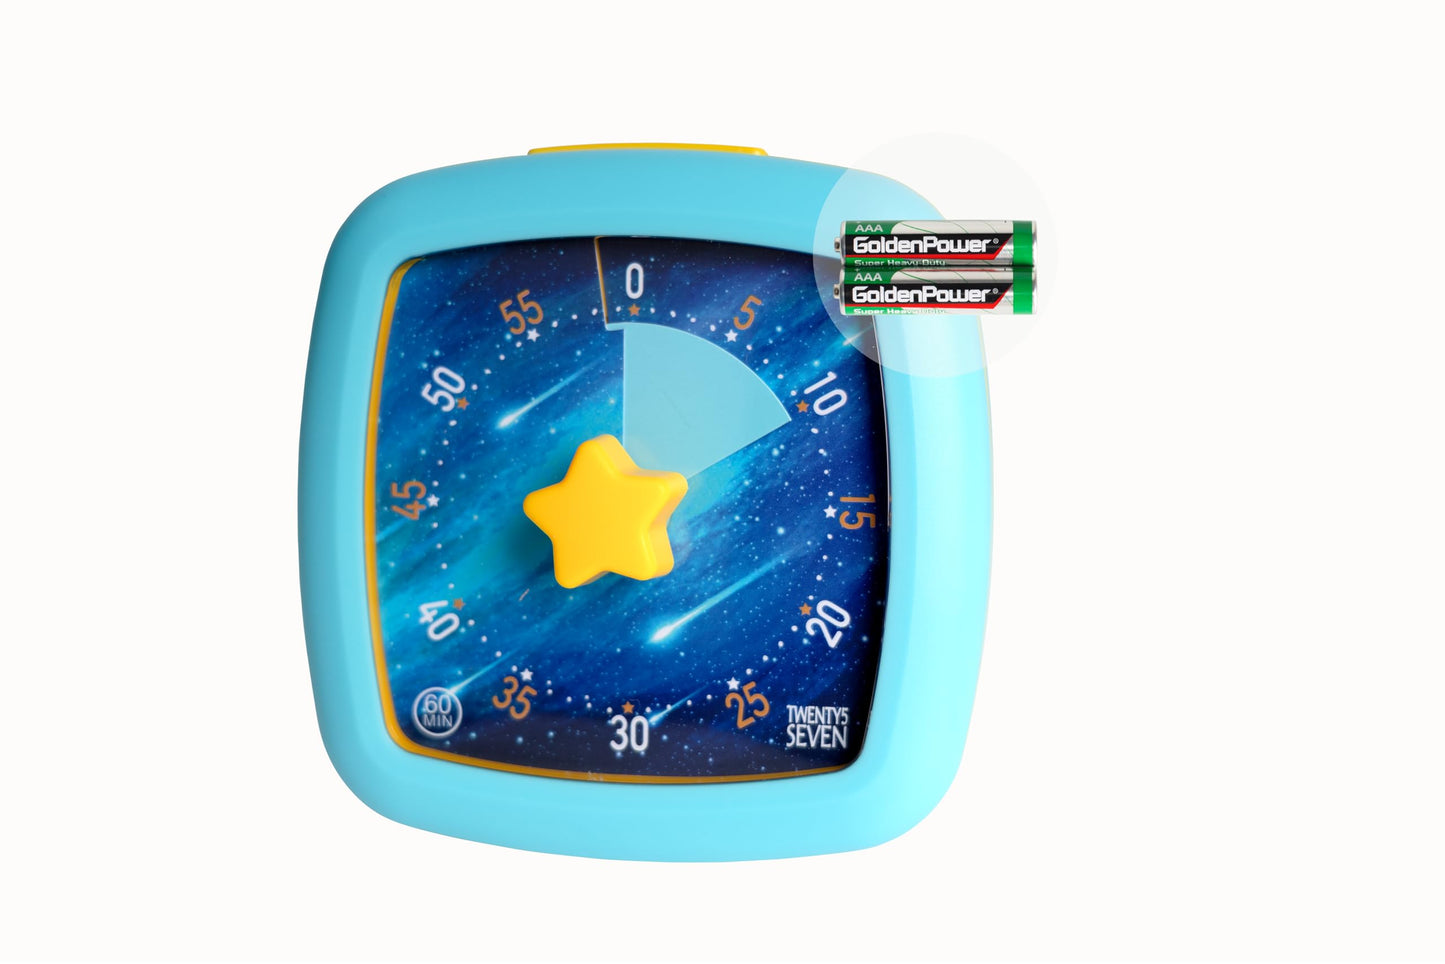 TWENTY5 SEVEN Countdown Timer 4 inch with Alarm Stop Button, Meteor Pattern Visual Timer, 60 Minute 1 Hour Countdown Clock with Star Knob for Kids Exam Time Management, Blue